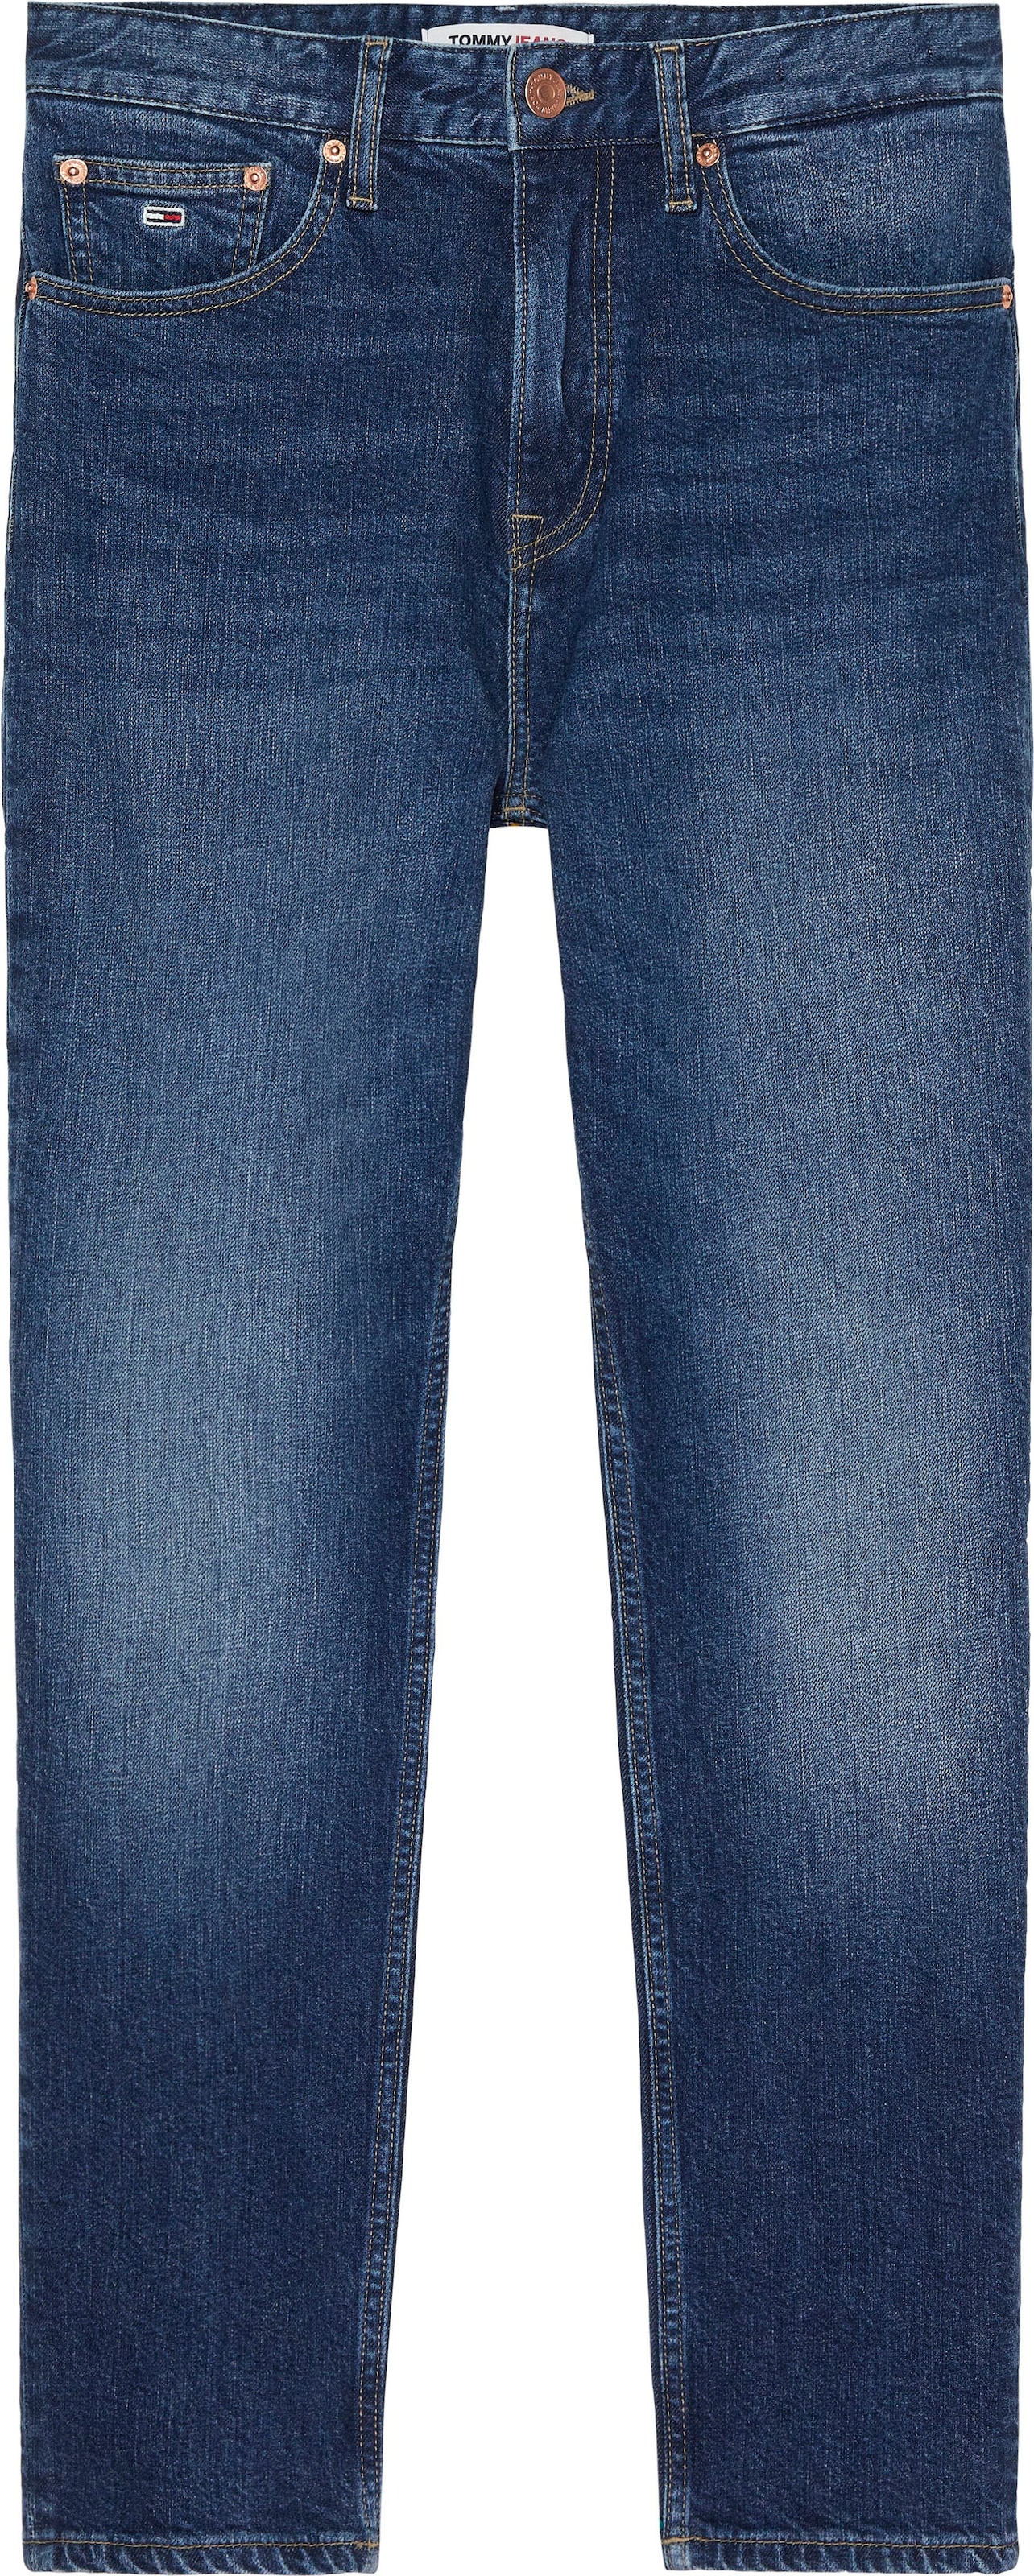 Jeans Slim-fit-Jeans CG4139«, Tommy Tommy HR OTTOversand Logo-Badge »IZZIE SL ANK mit bei